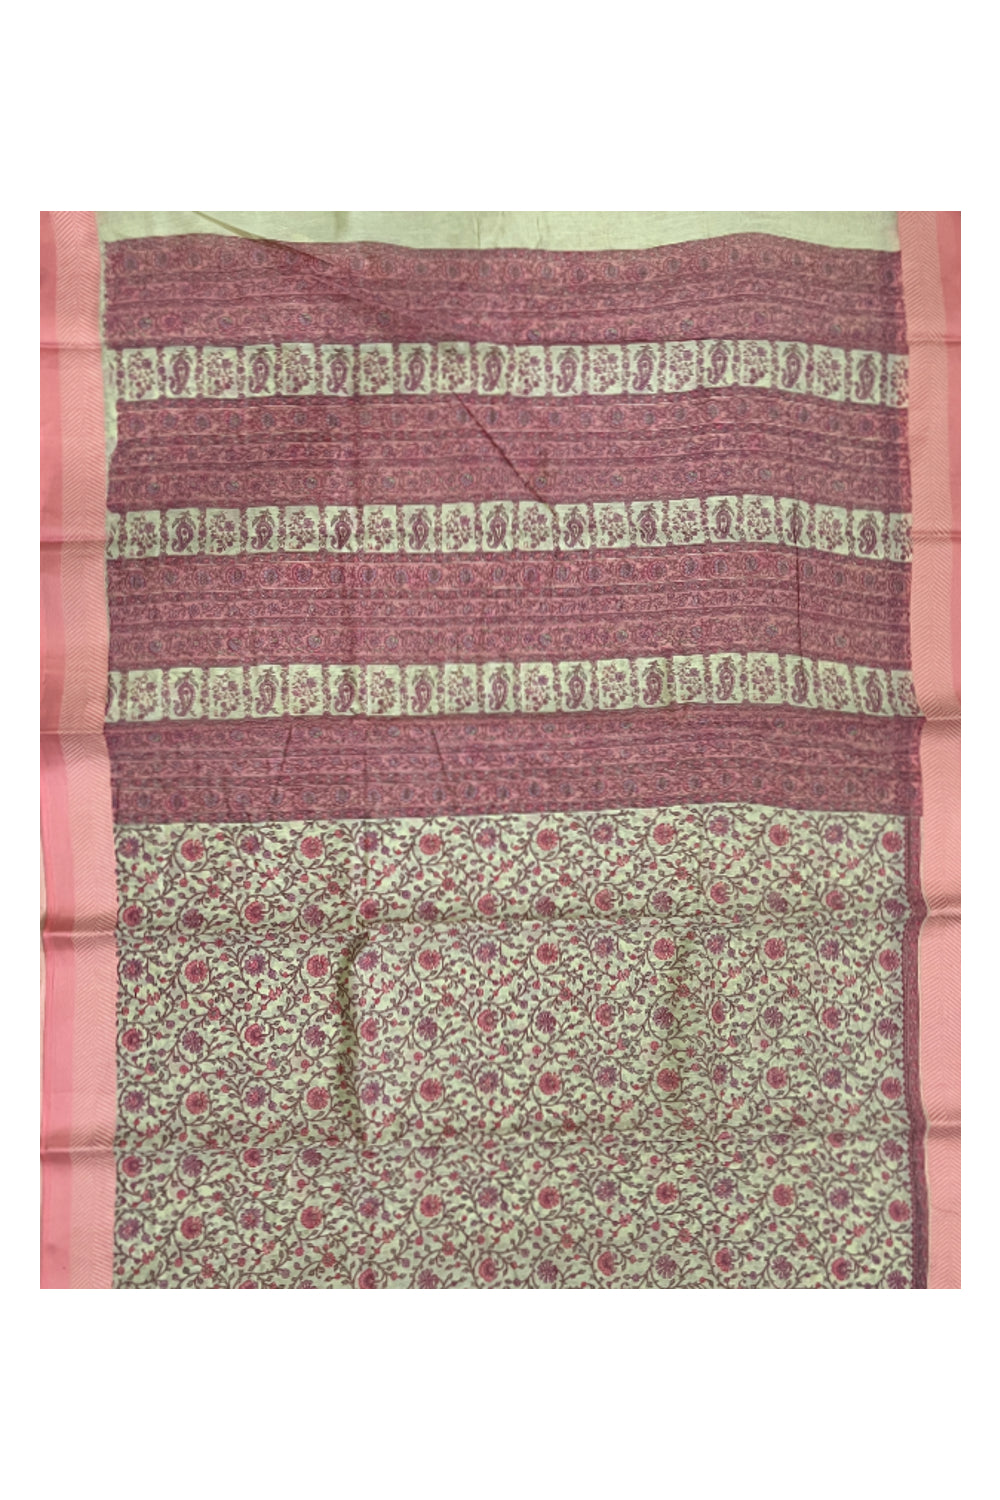 Southloom Cotton Floral Printed Saree with Pink Border